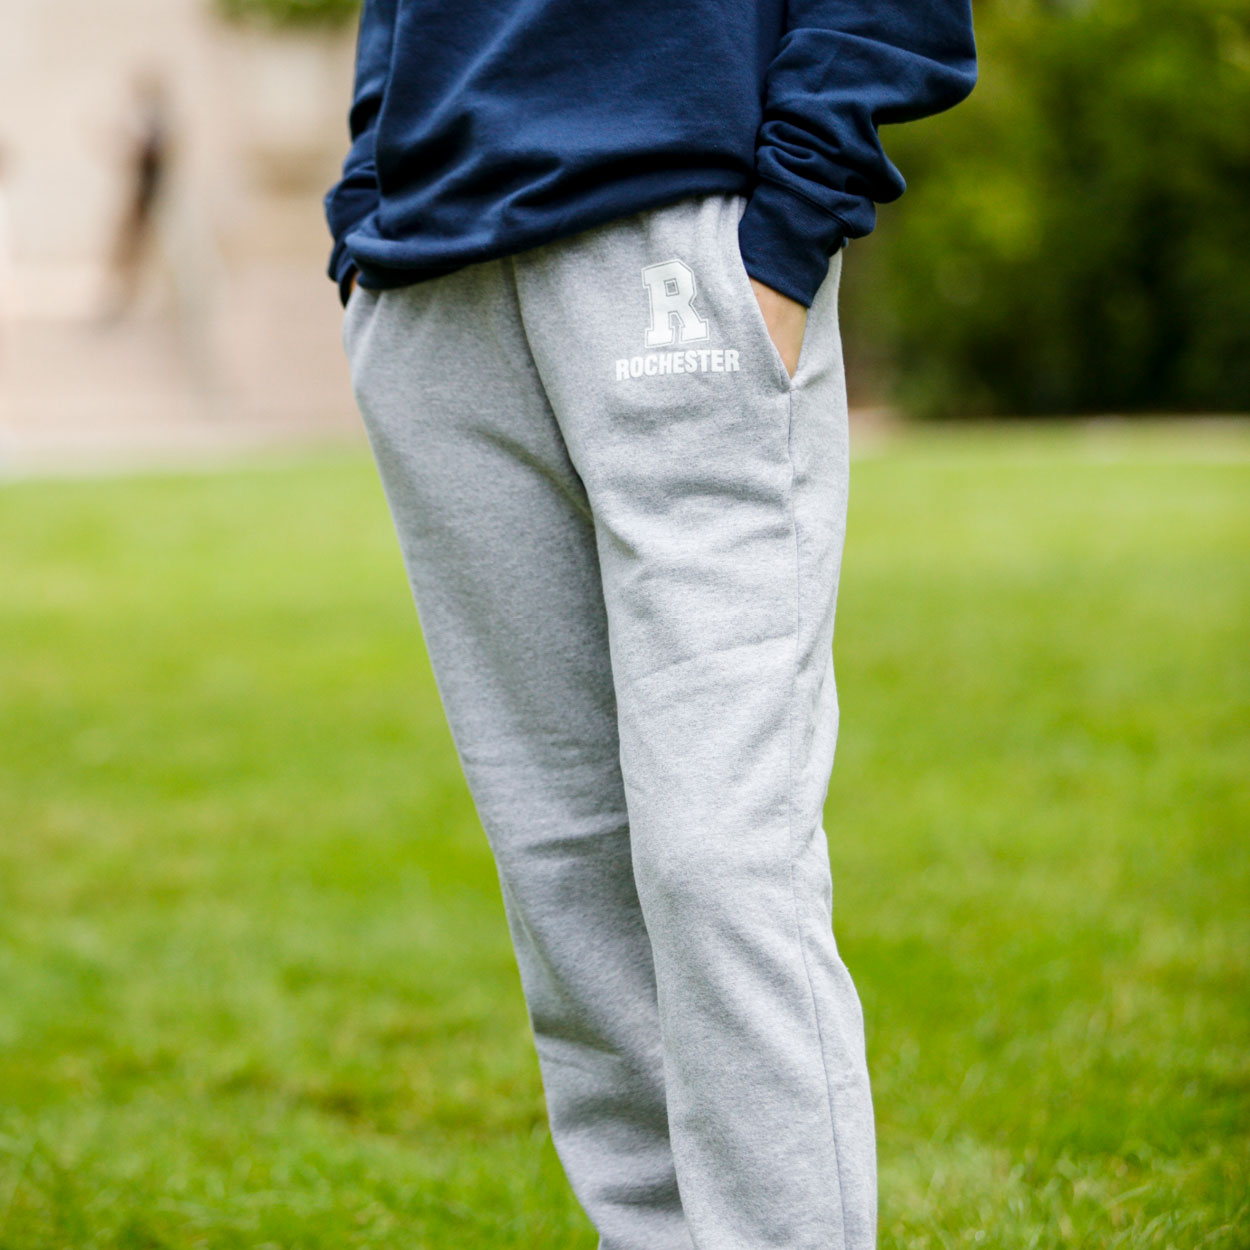 Rochester sweatpants being worn by a student